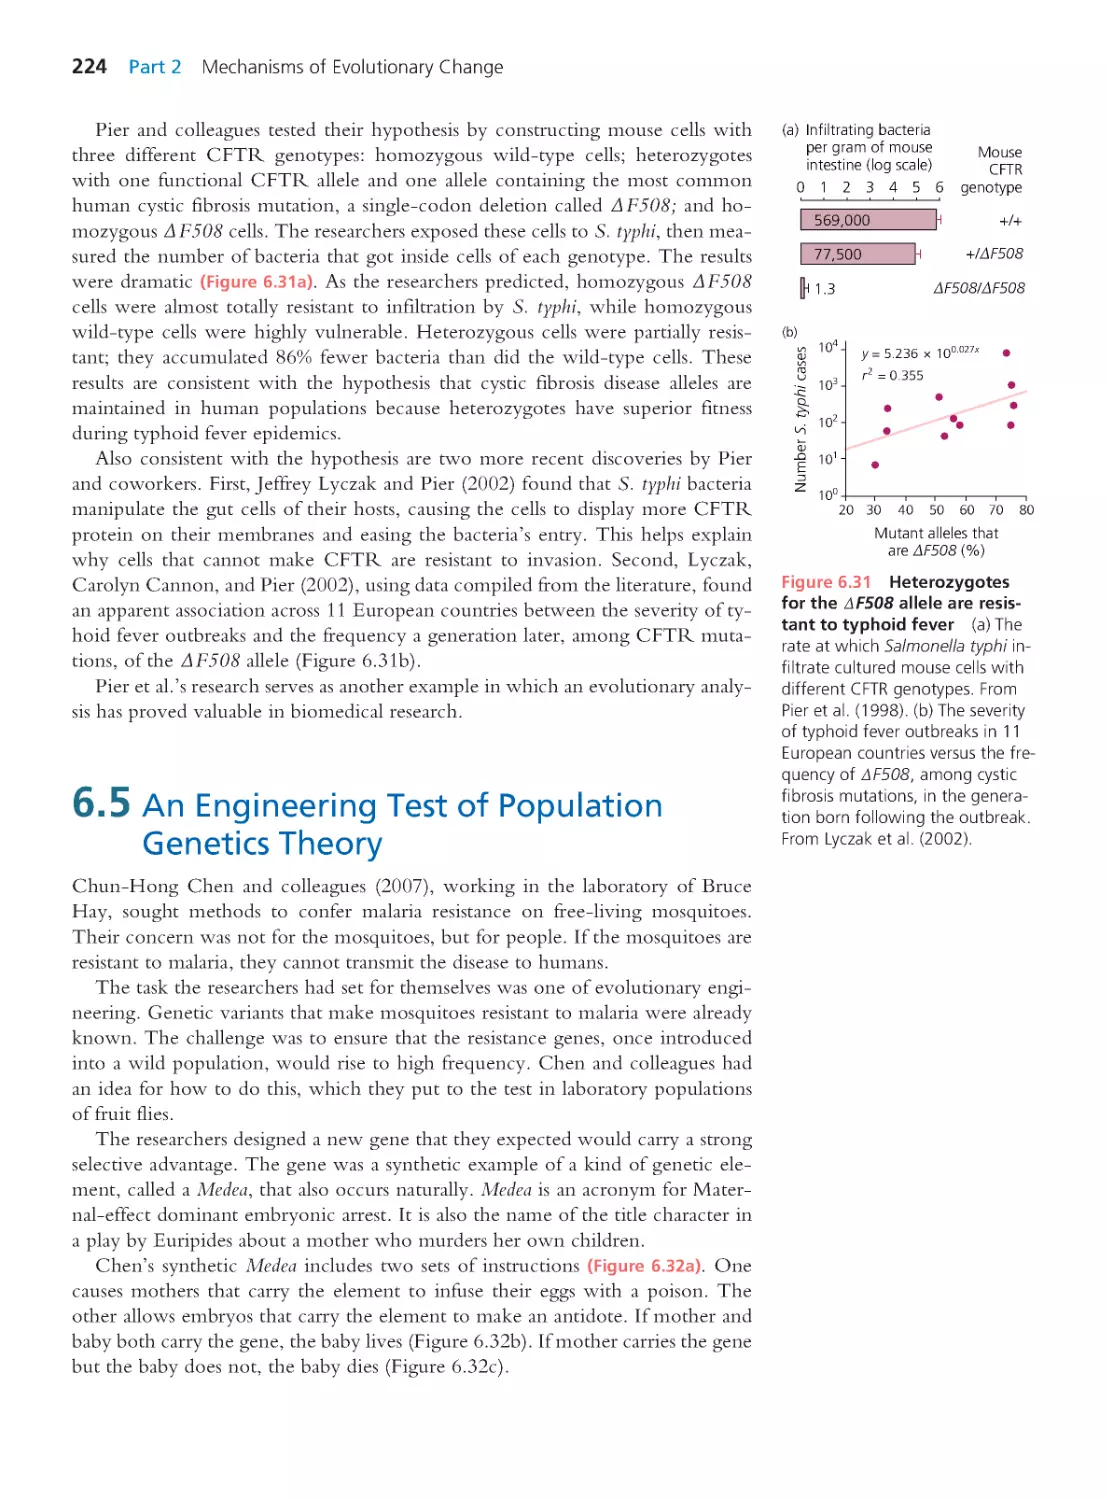 6.5 An Engineering Test of Population Genetics Theory